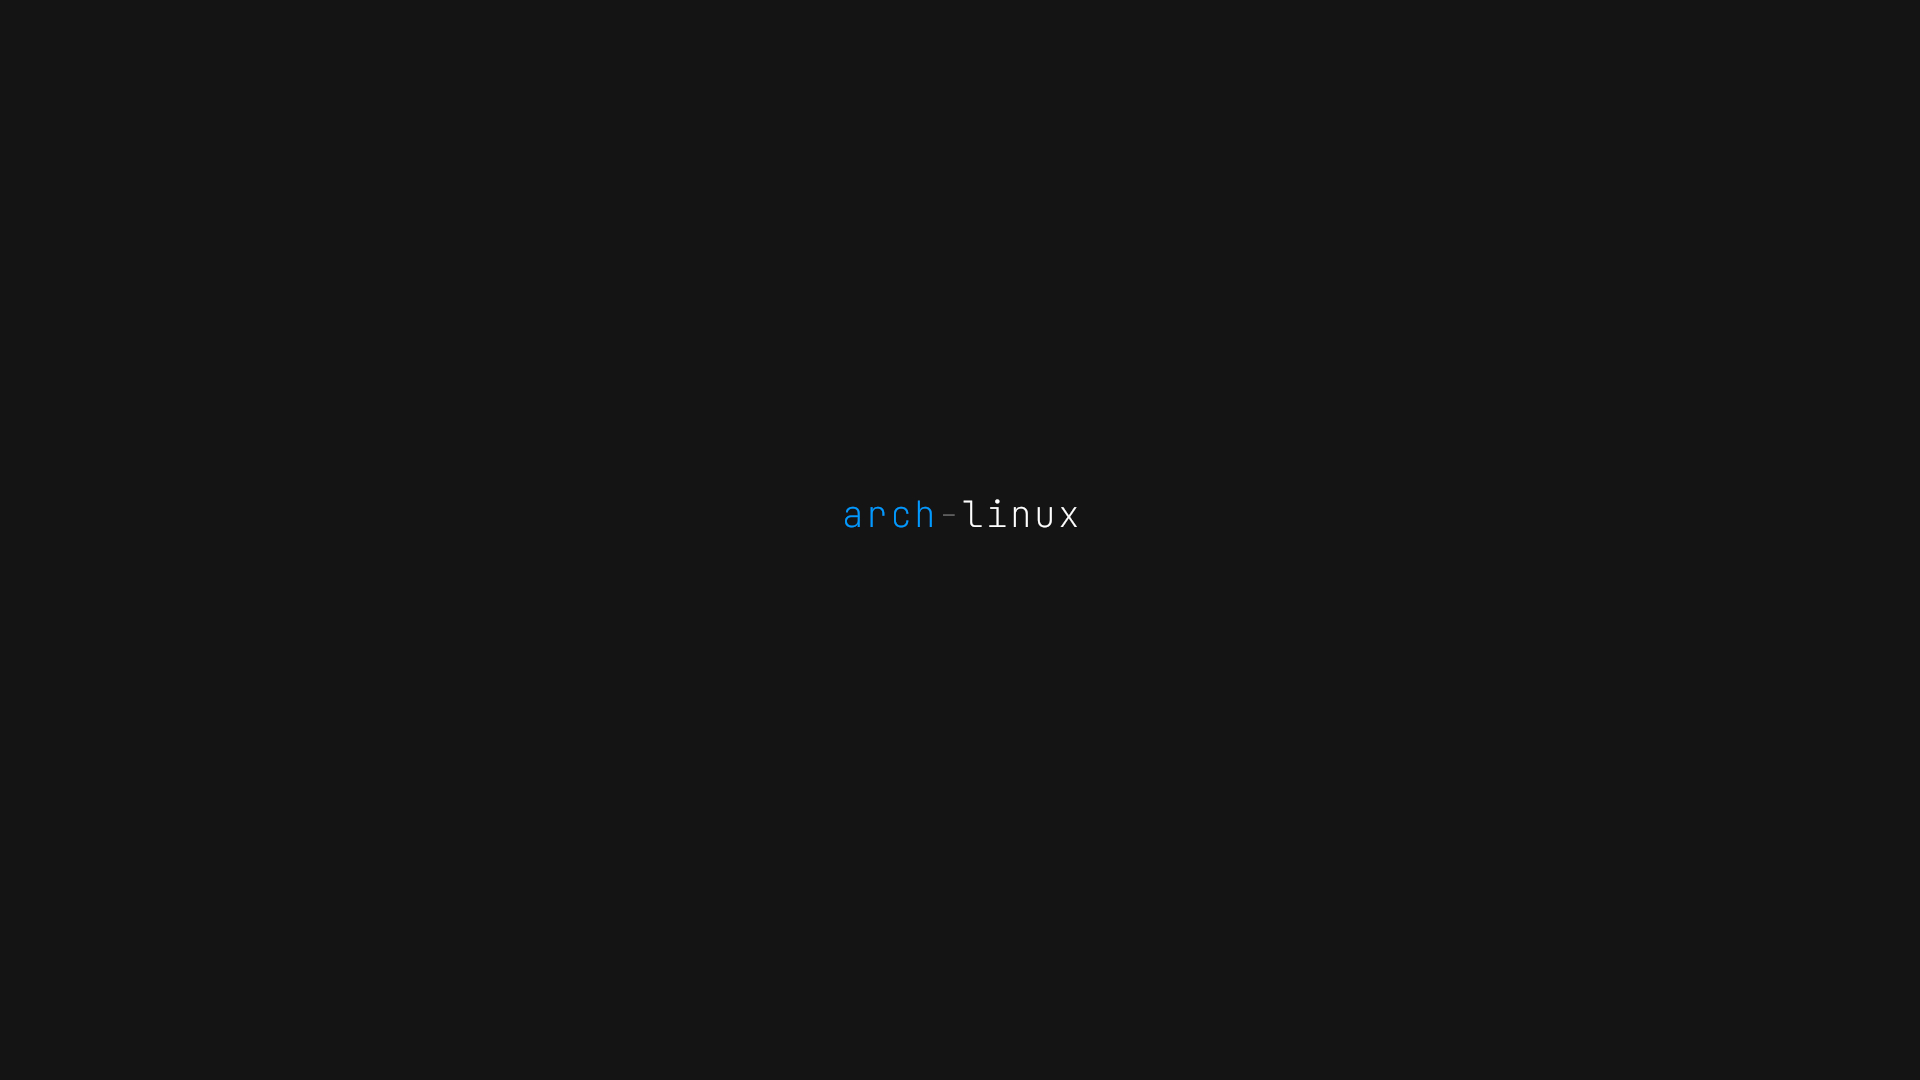 General 1920x1080 Arch Linux minimalism simple background Linux dark operating system